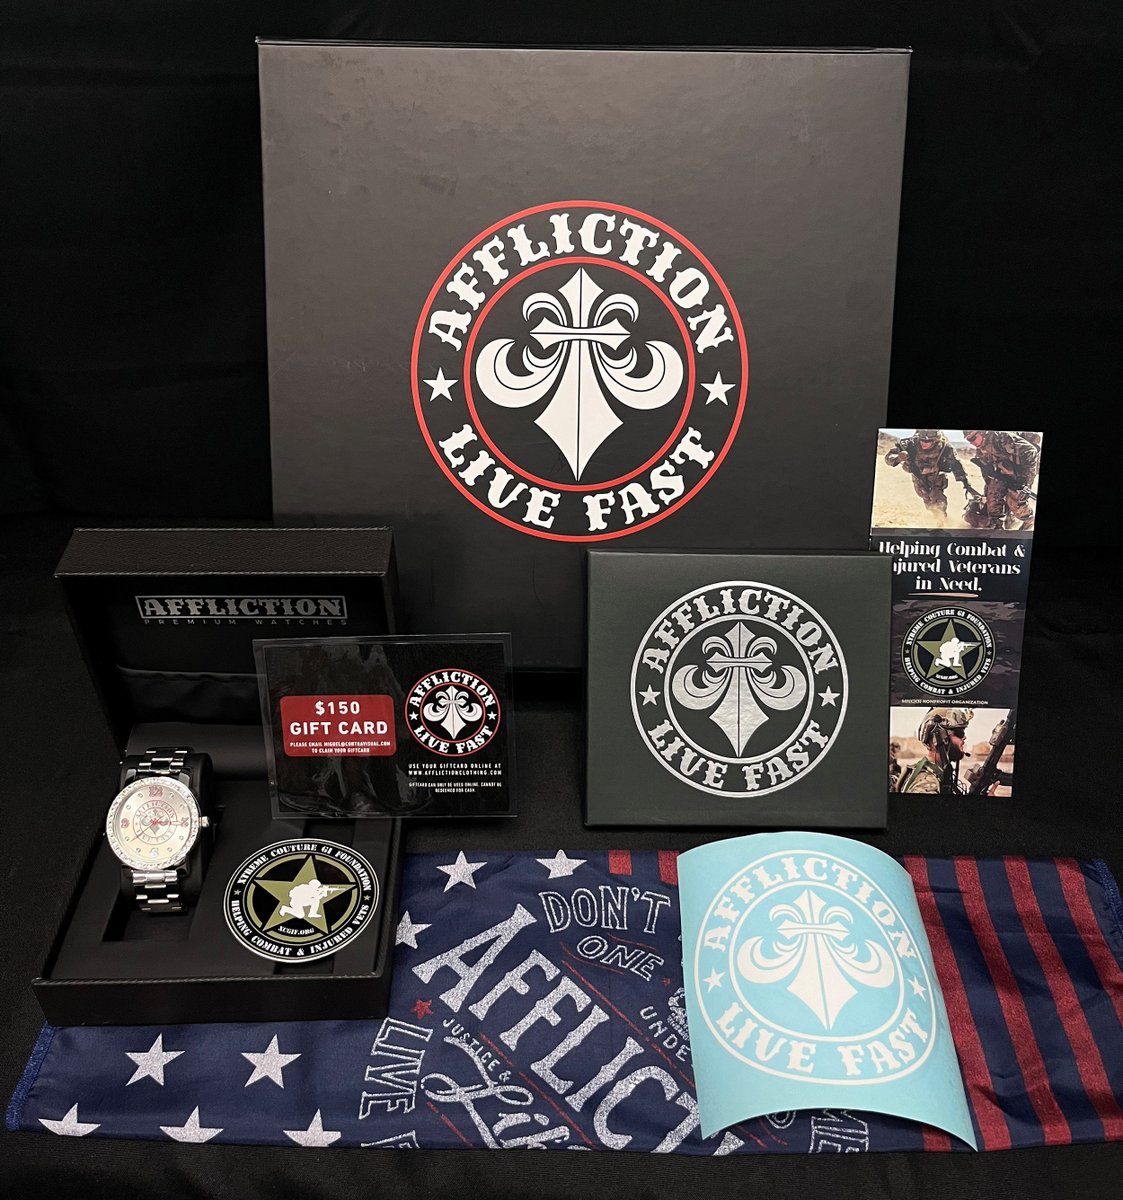 Raffle items are coming in for our 16th Annual Ride For Our Troops 5/18/24 - Vegas . A BIG shoutout to @Affliction for their ongoing support of combat and injured veterans in need and their donation. Join us for the ride & you might be the lucky winner! xcgif.org/events/RideFor…